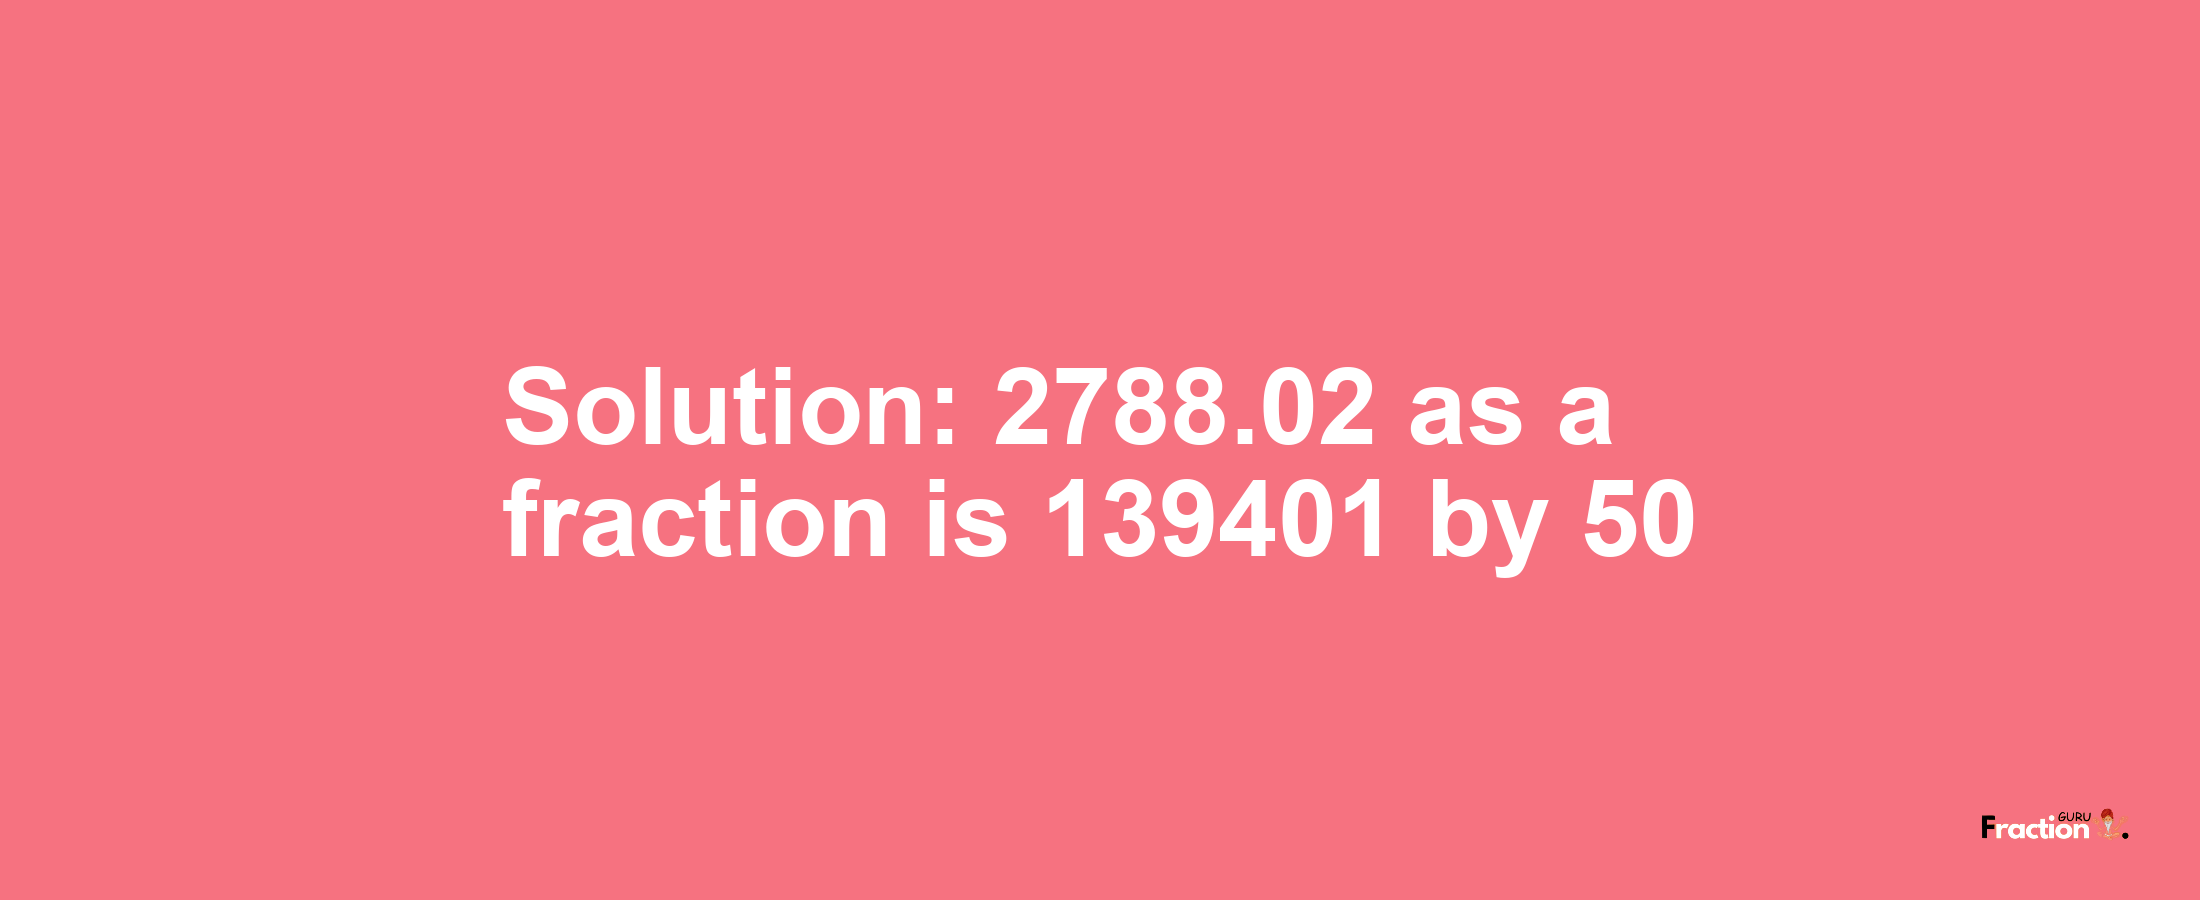 Solution:2788.02 as a fraction is 139401/50